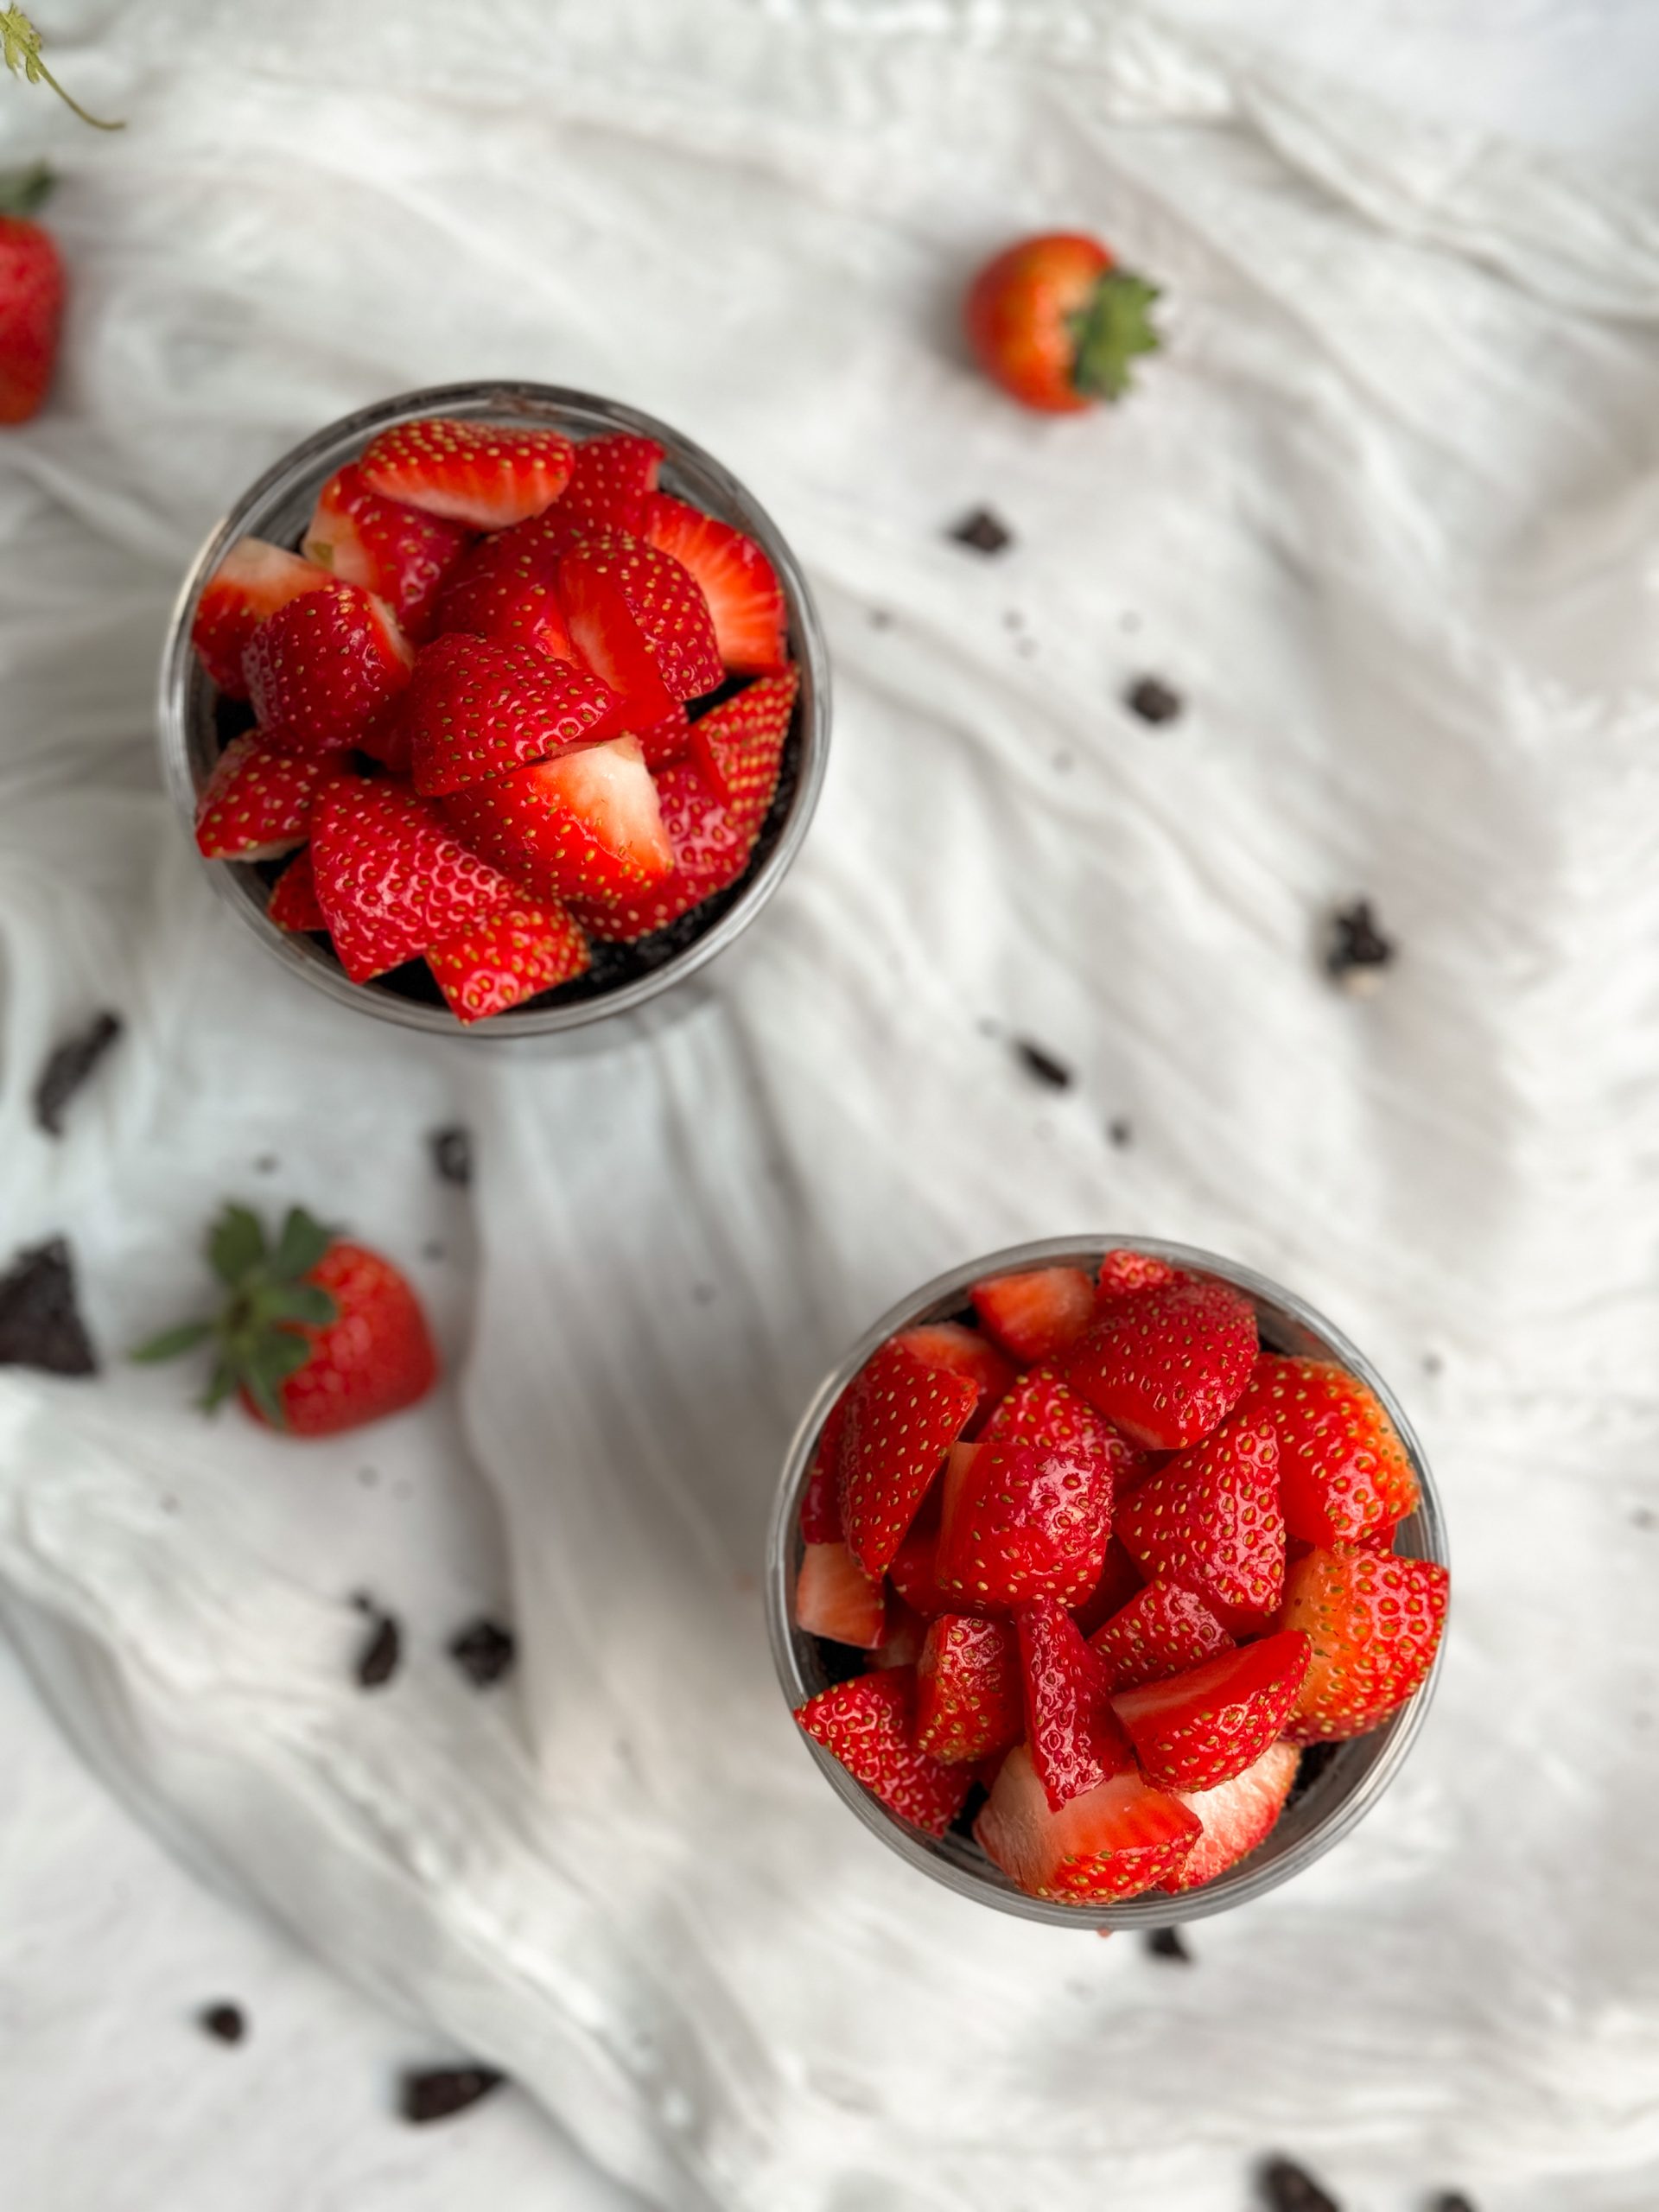 2 glass mugs with chocolate mug cakes inside, topped with chopped strawberries. picture from top